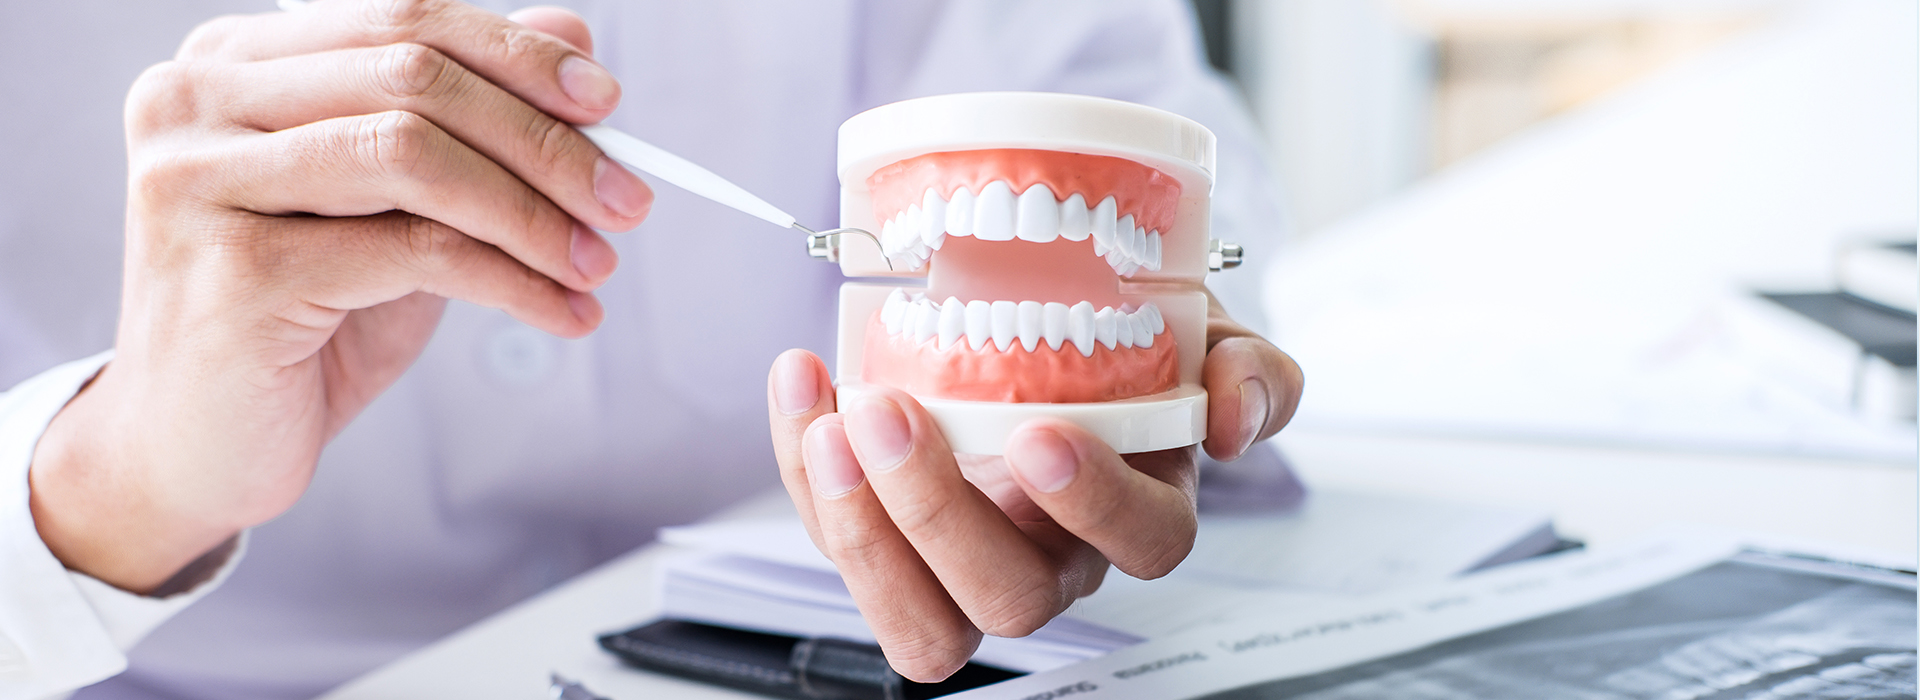 A person holding a toothbrush and a cup of water, with a focus on dental hygiene.